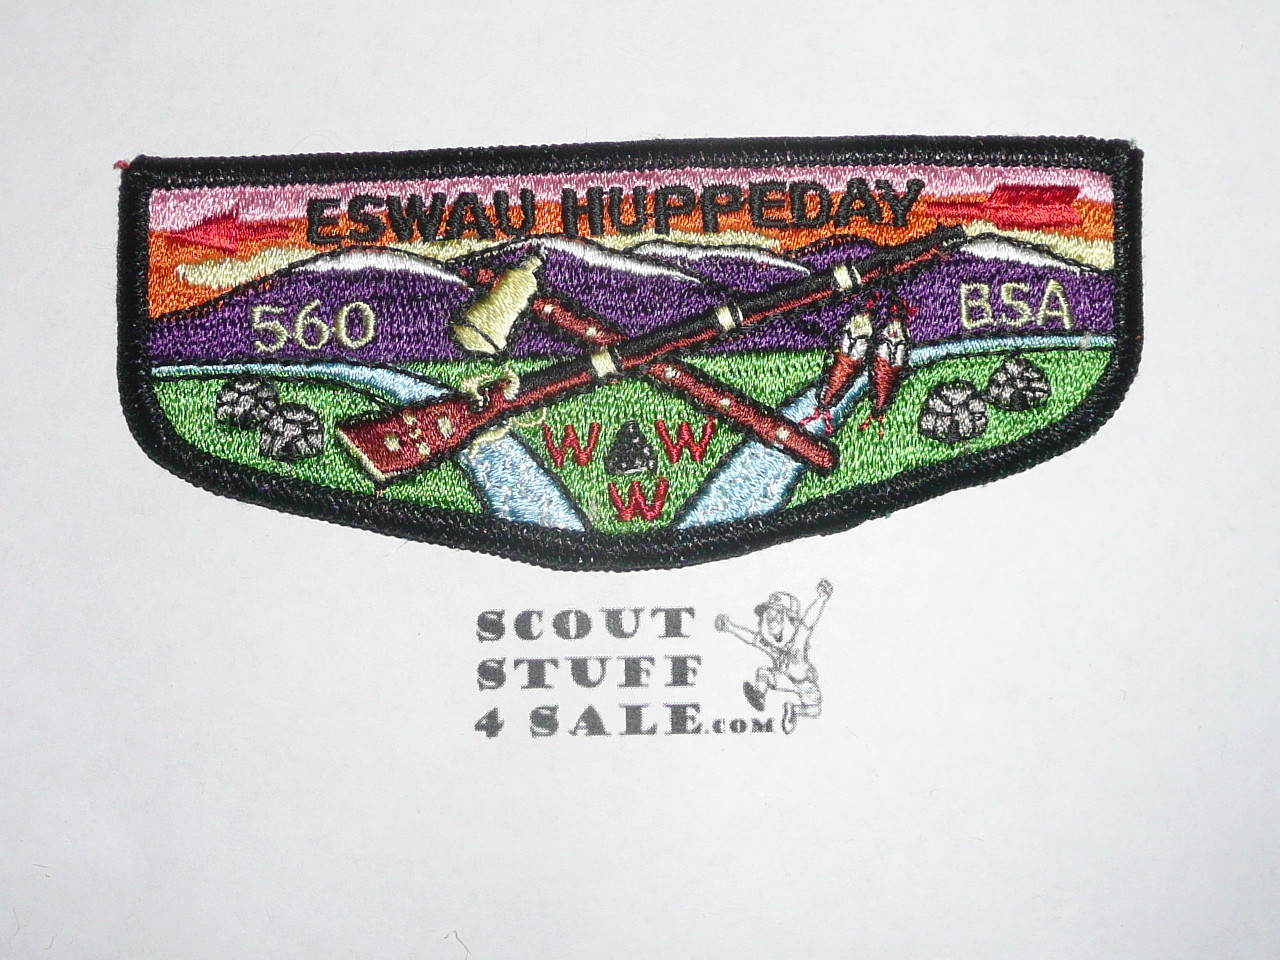 Order of the Arrow Lodge #560 Eswau Huppeday s39 Flap Patch